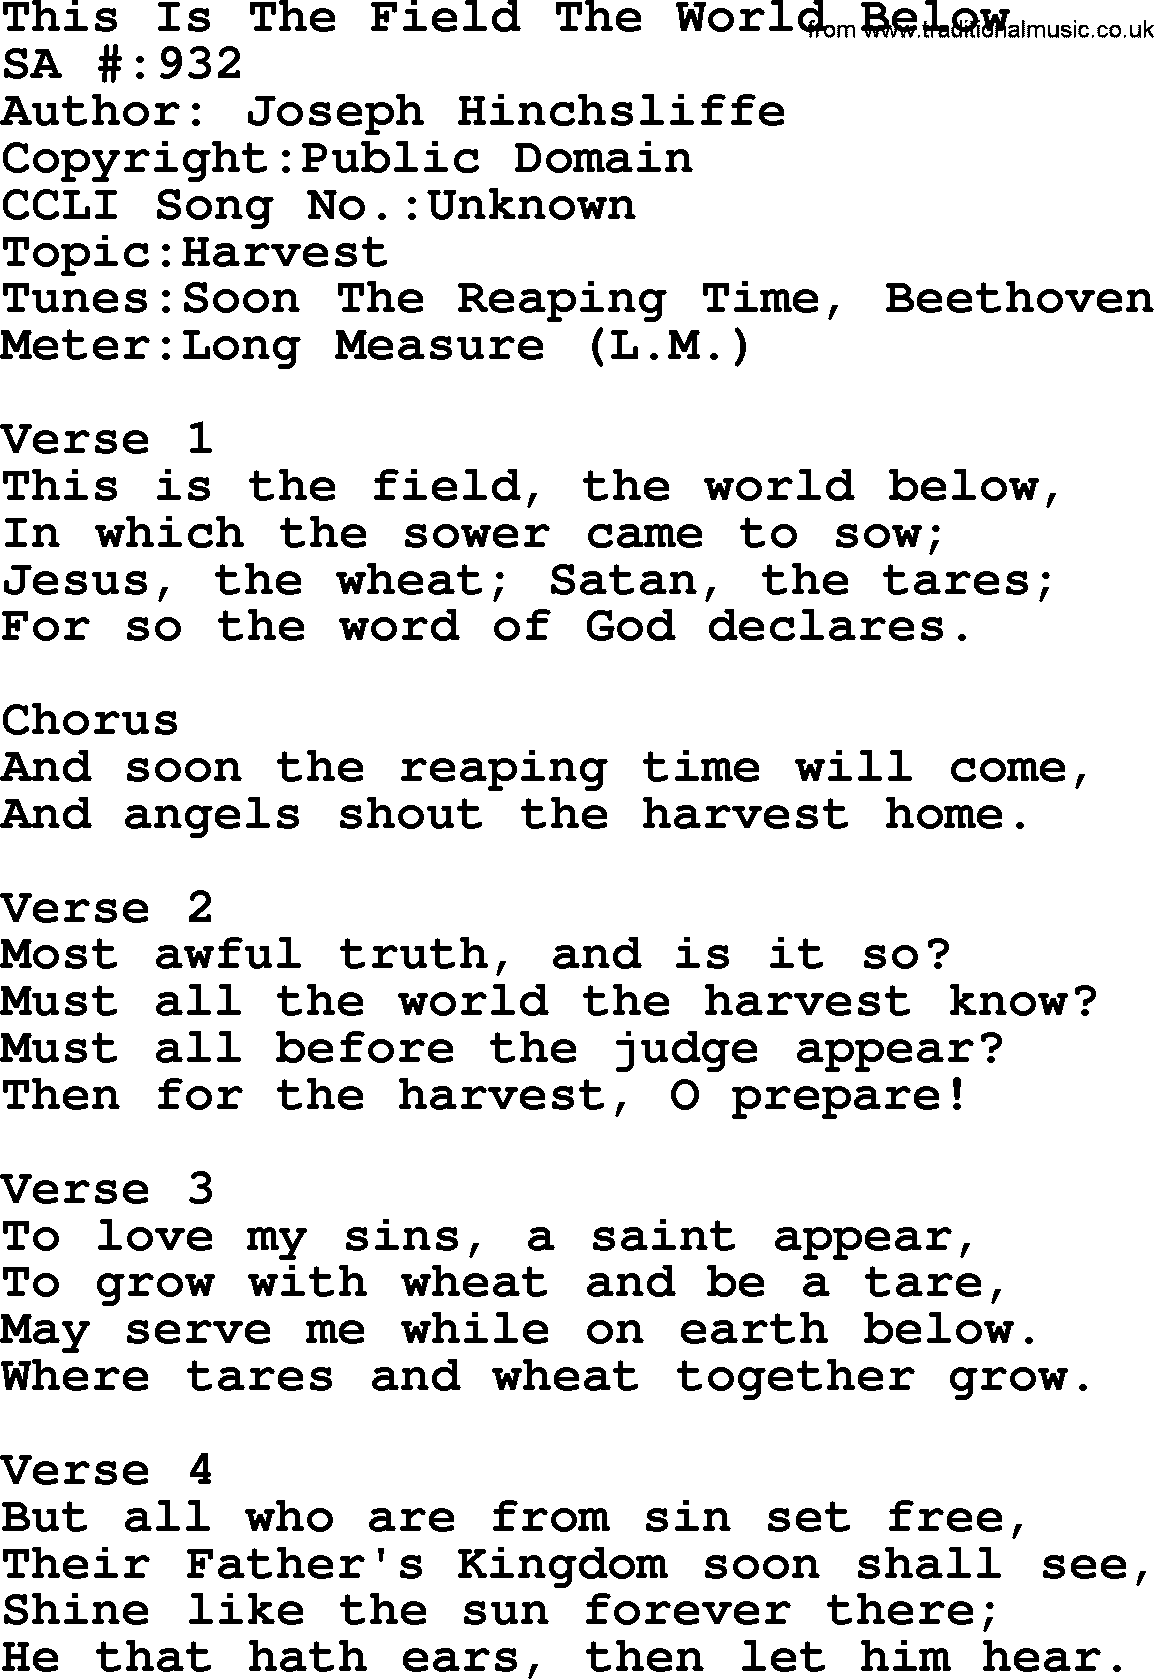 Salvation Army Hymnal, title: This Is The Field The World Below, with lyrics and PDF,